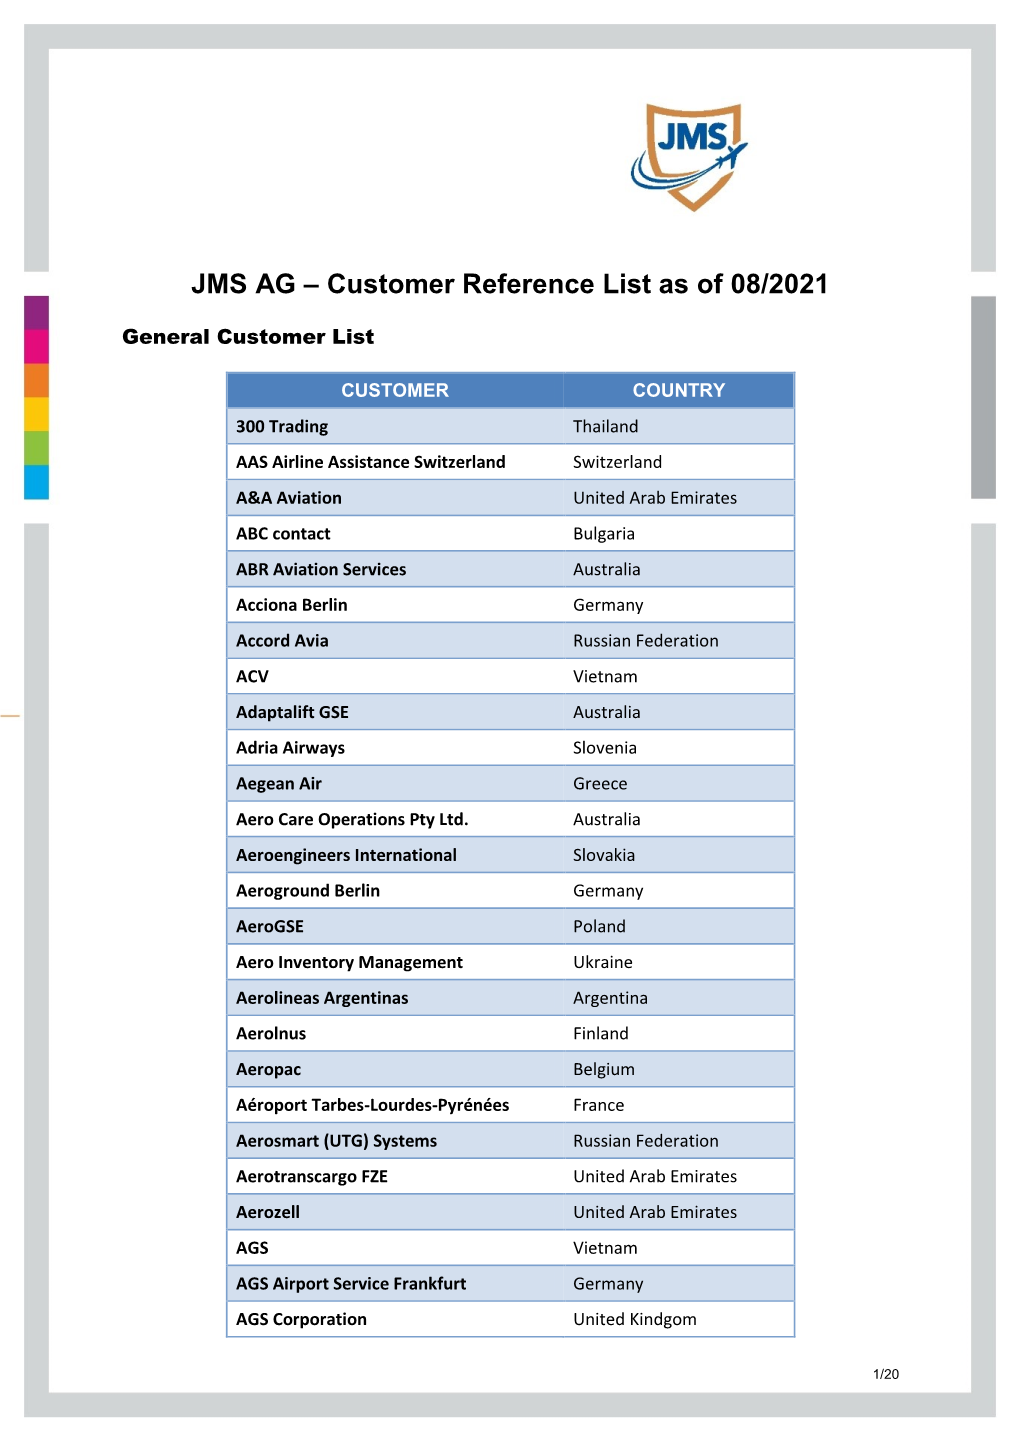 Customer Reference List As of 08/2021